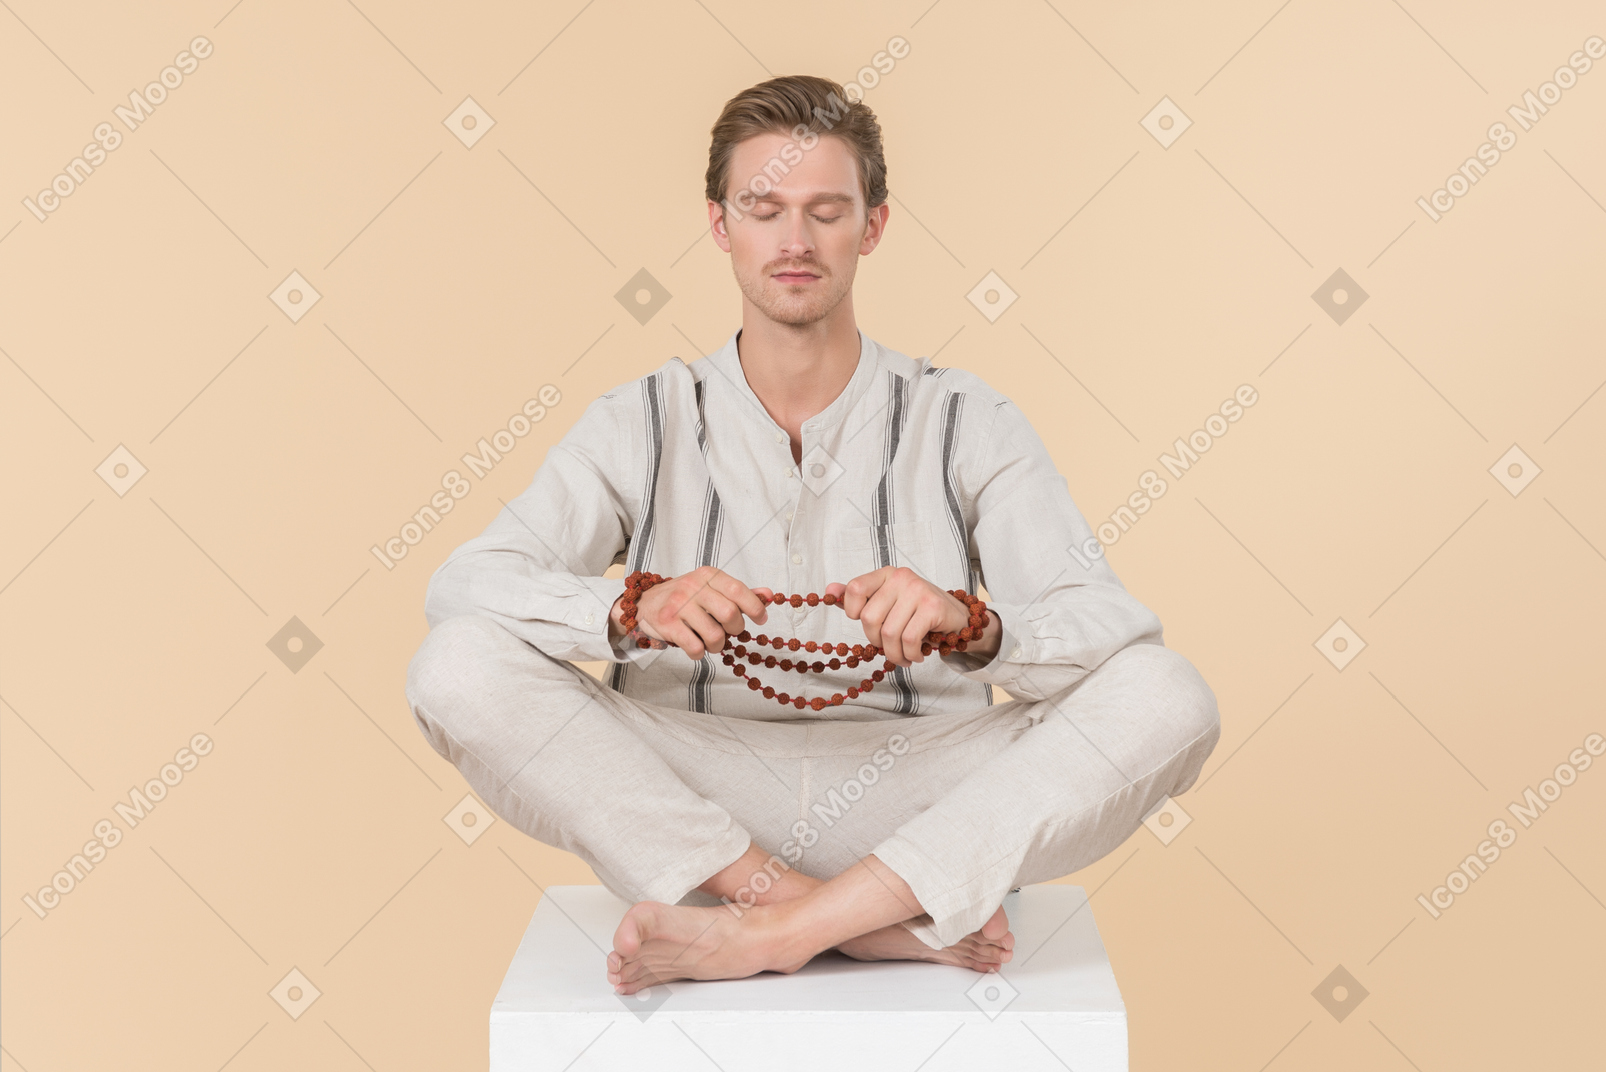 Young caucasian man sitting in lotus position holding necklace